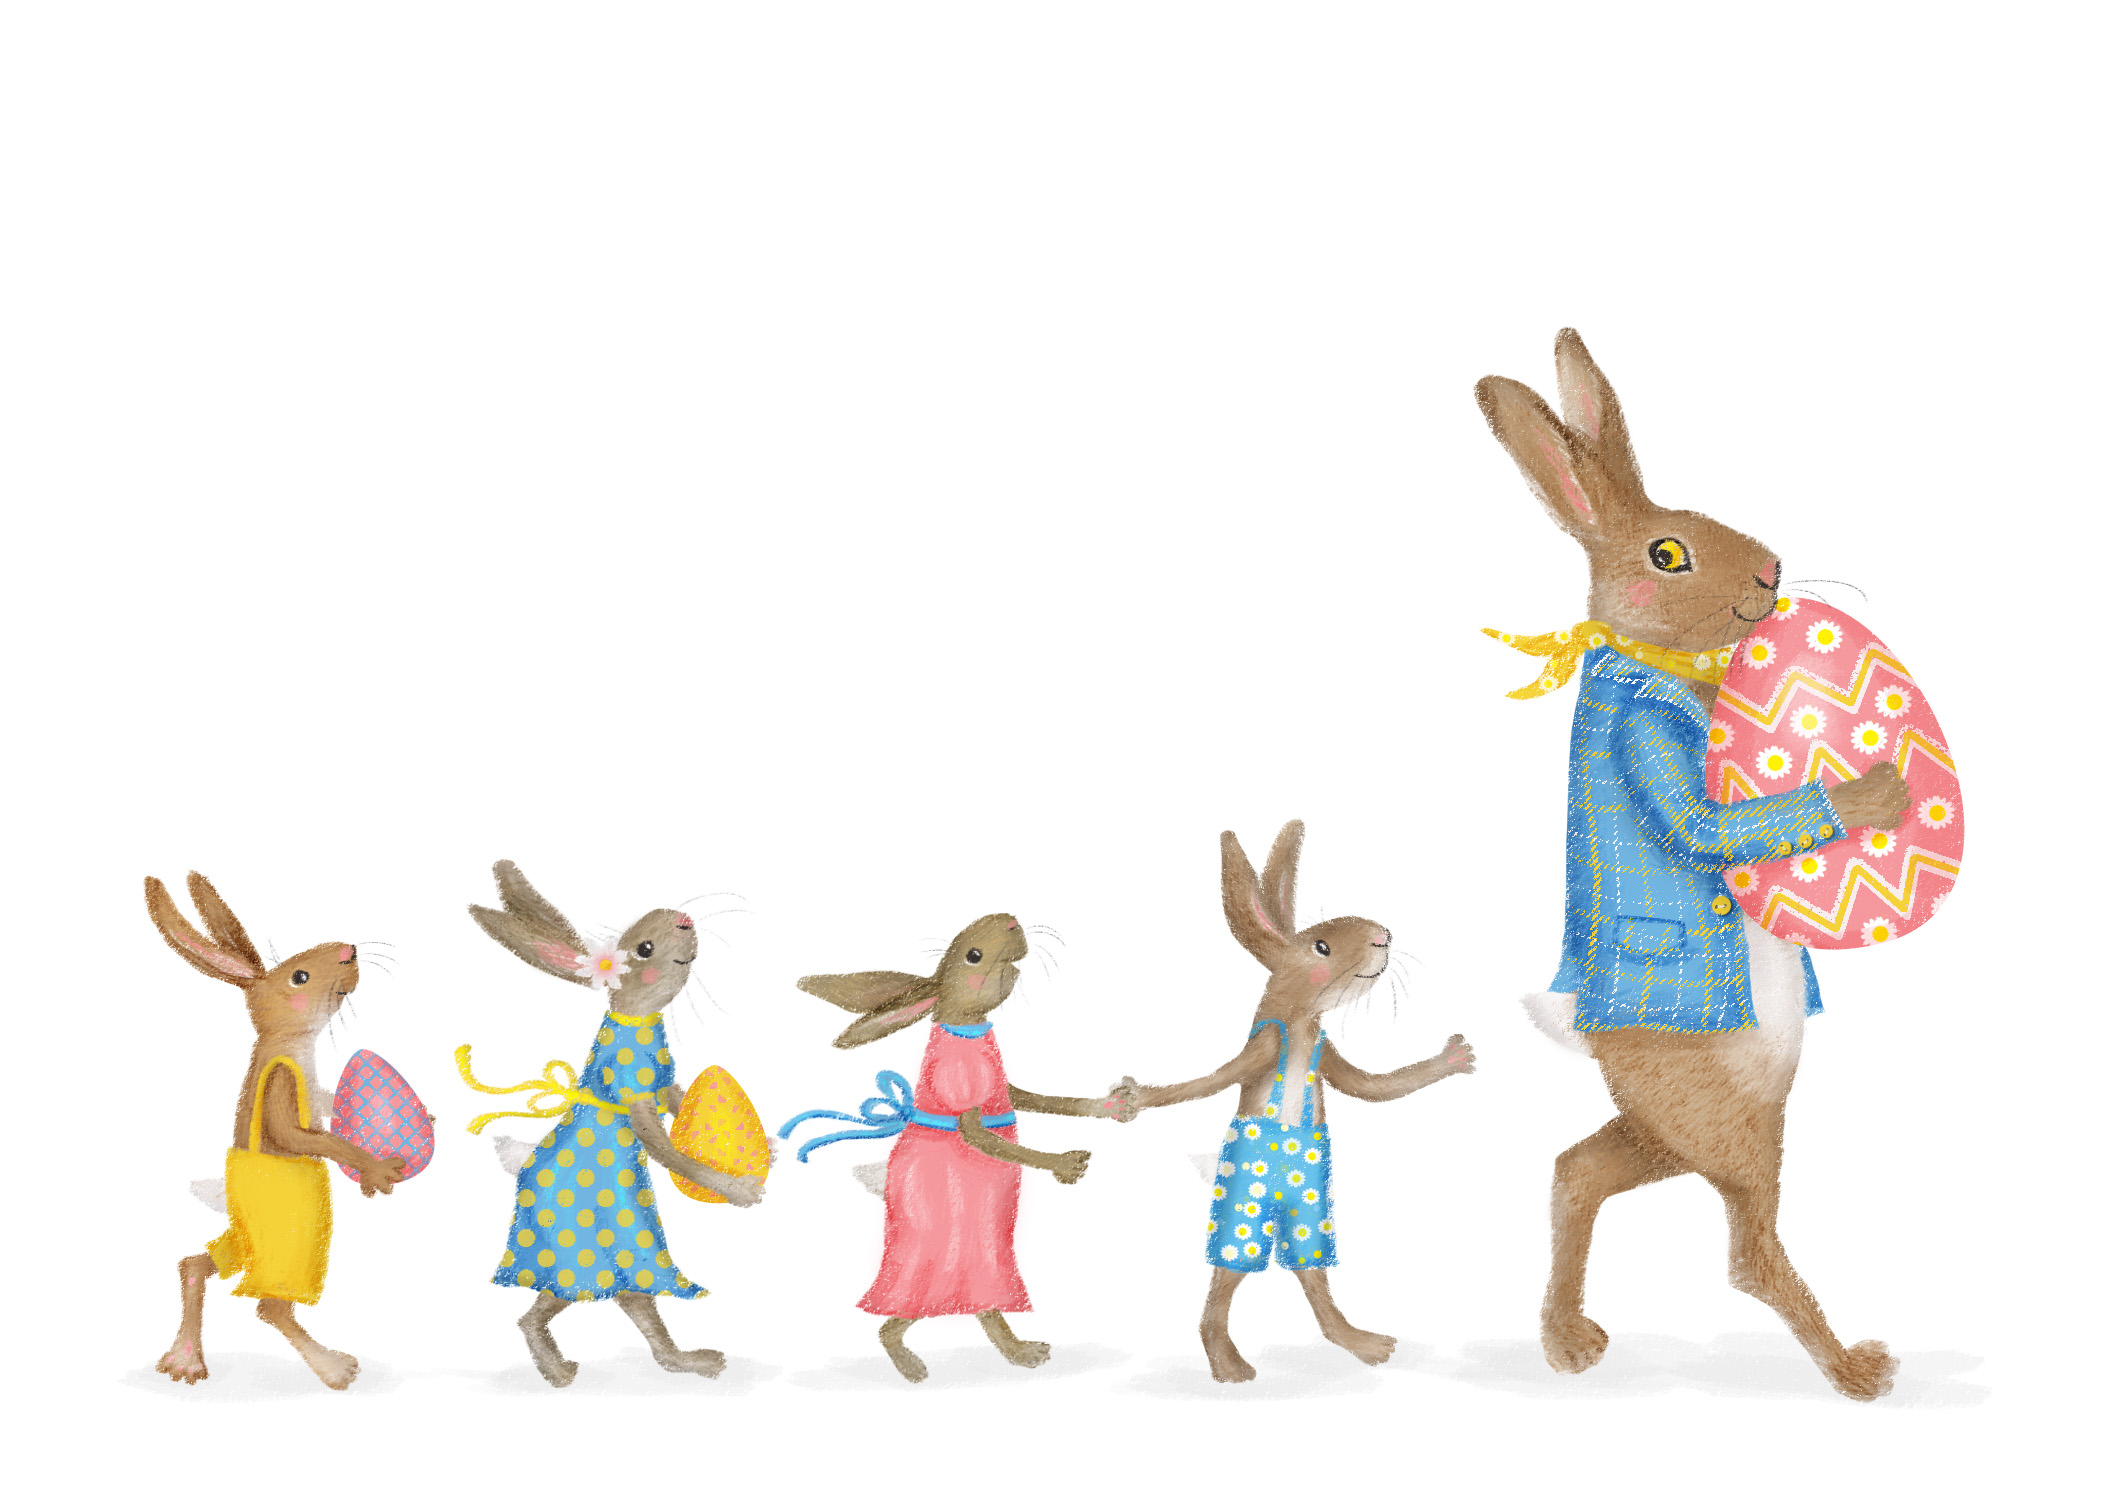 Big hare followed by four smaller hares, carrying Easter eggs